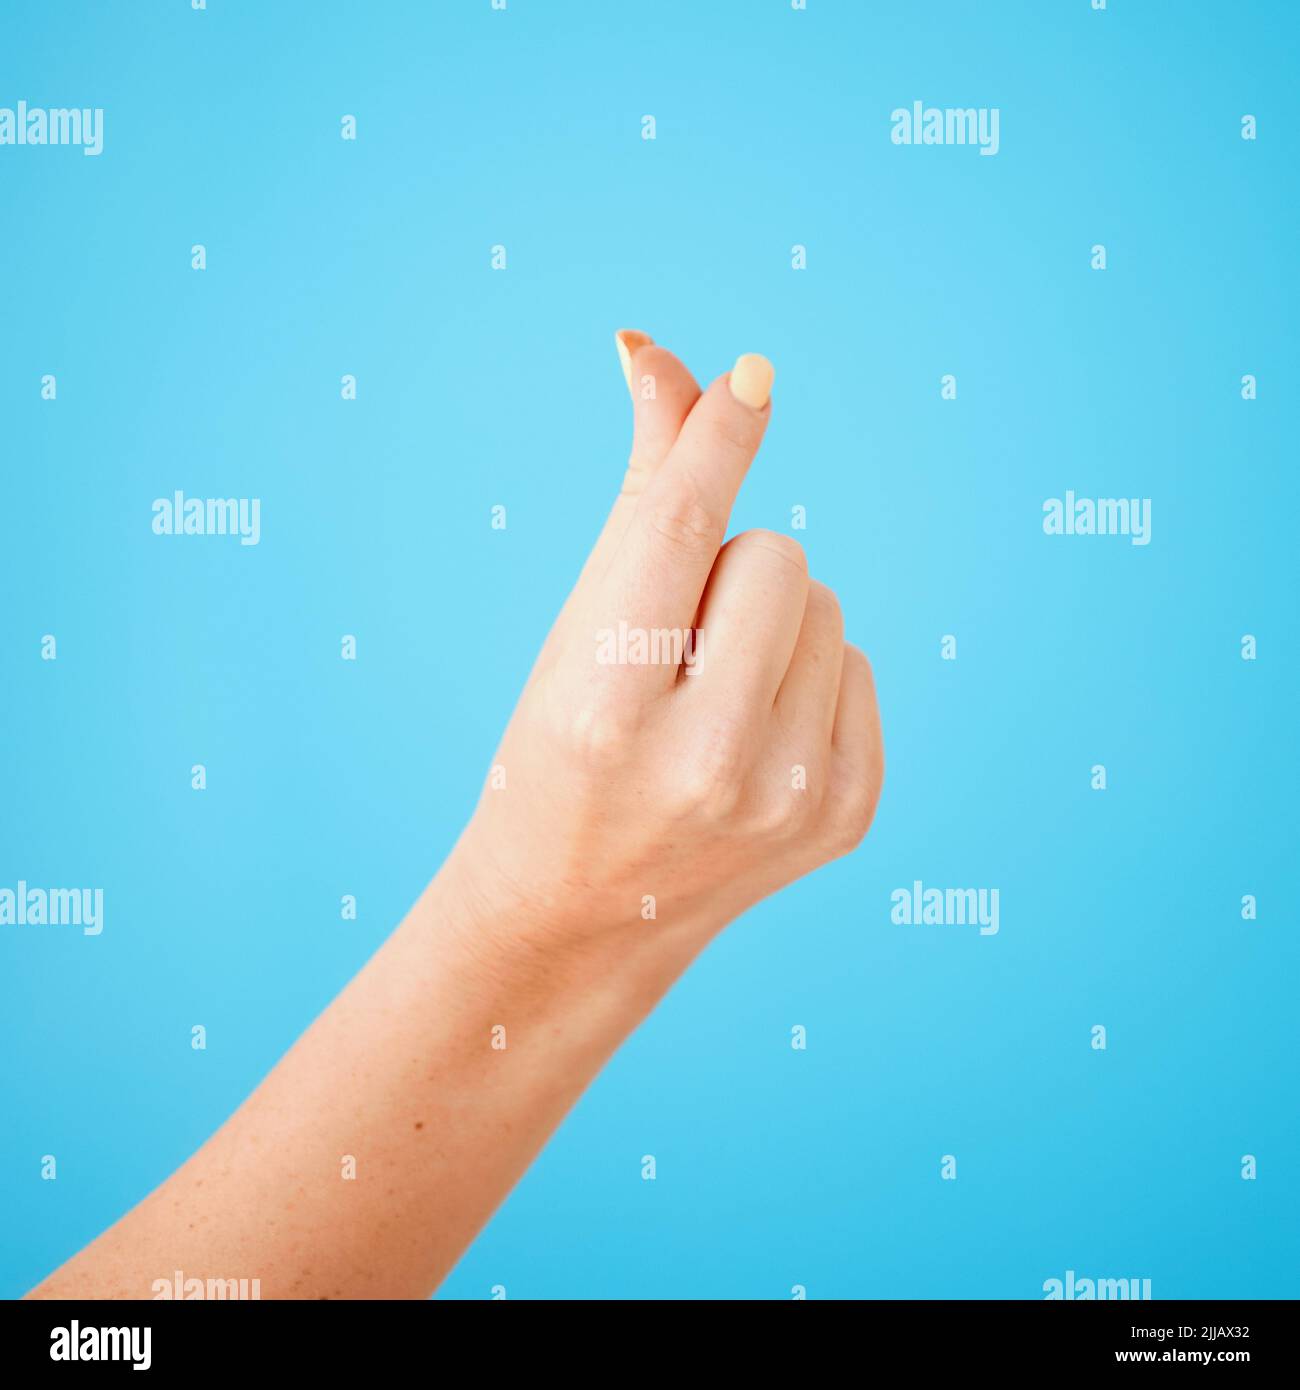 https://c8.alamy.com/comp/2JJAX32/your-financial-fairy-godmother-ready-to-make-your-debt-disappear-studio-shot-of-an-unrecognisable-woman-rubbing-her-fingers-together-against-a-yellow-2JJAX32.jpg